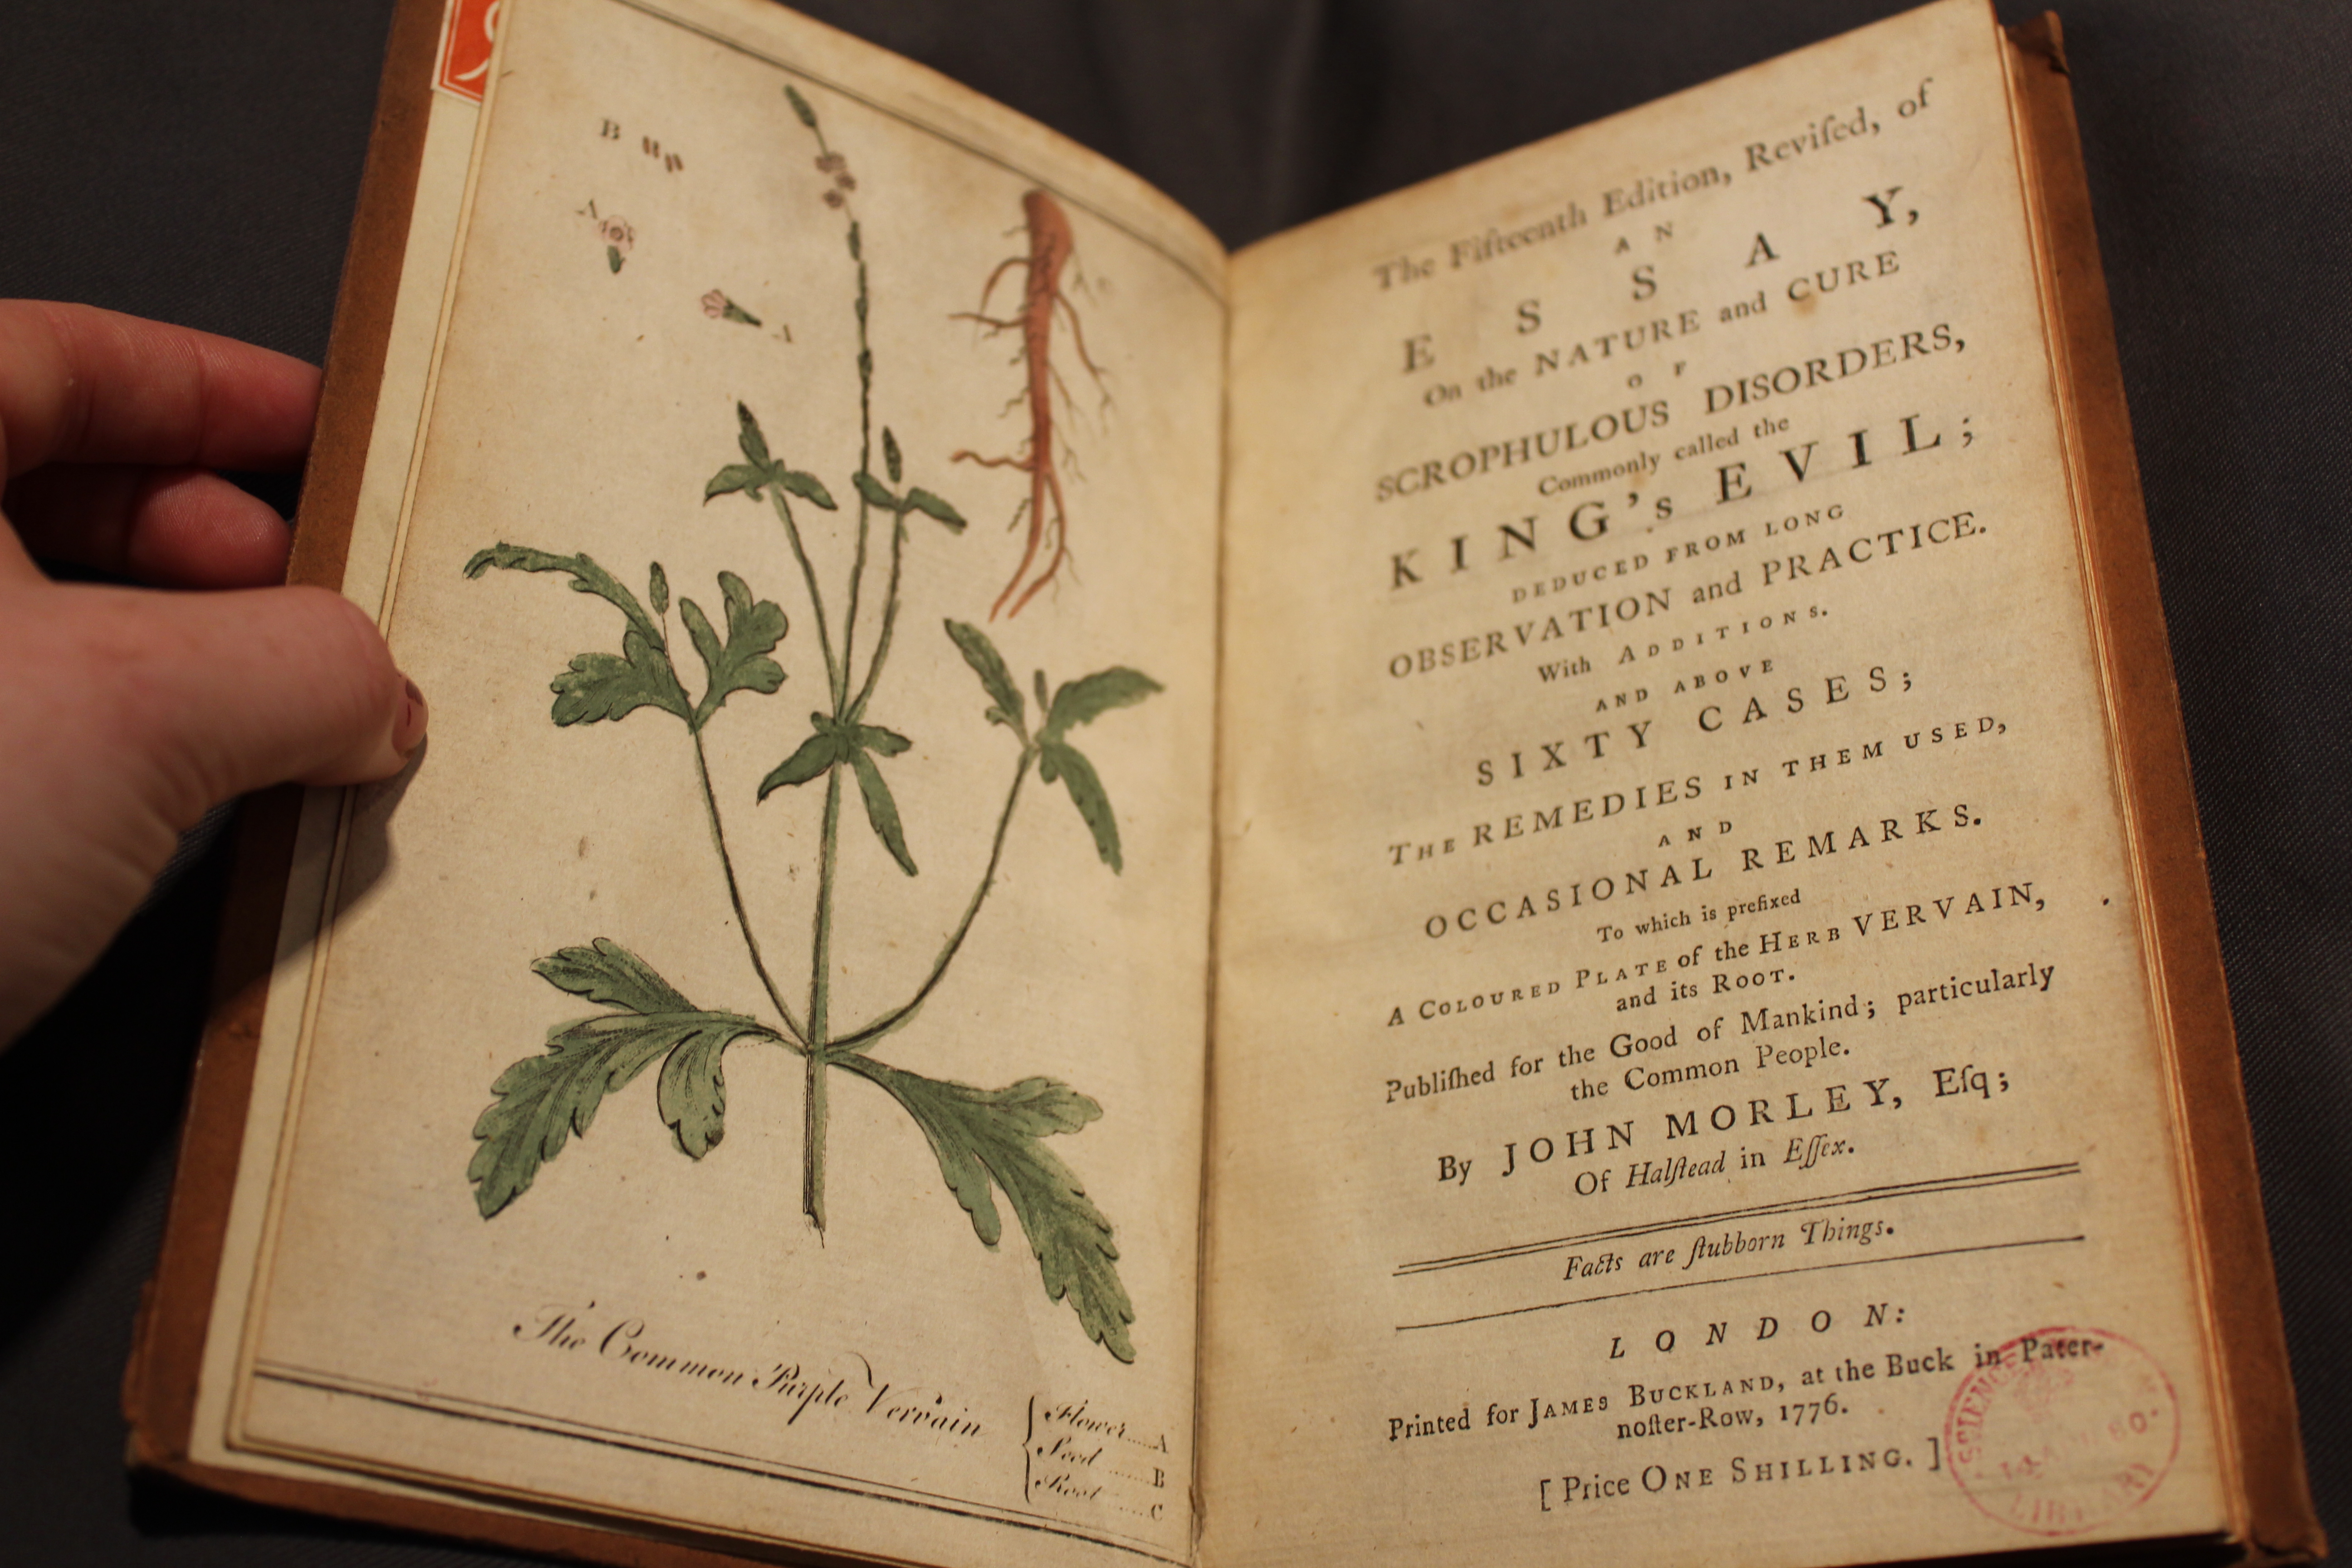 John Morley, The fifteenth edition, revised, of an essay, on the nature and cure of scrophulous disorders, commonly called the king's evil. London, 1776. Open at the title page and an inserted plate of the herb vervain.